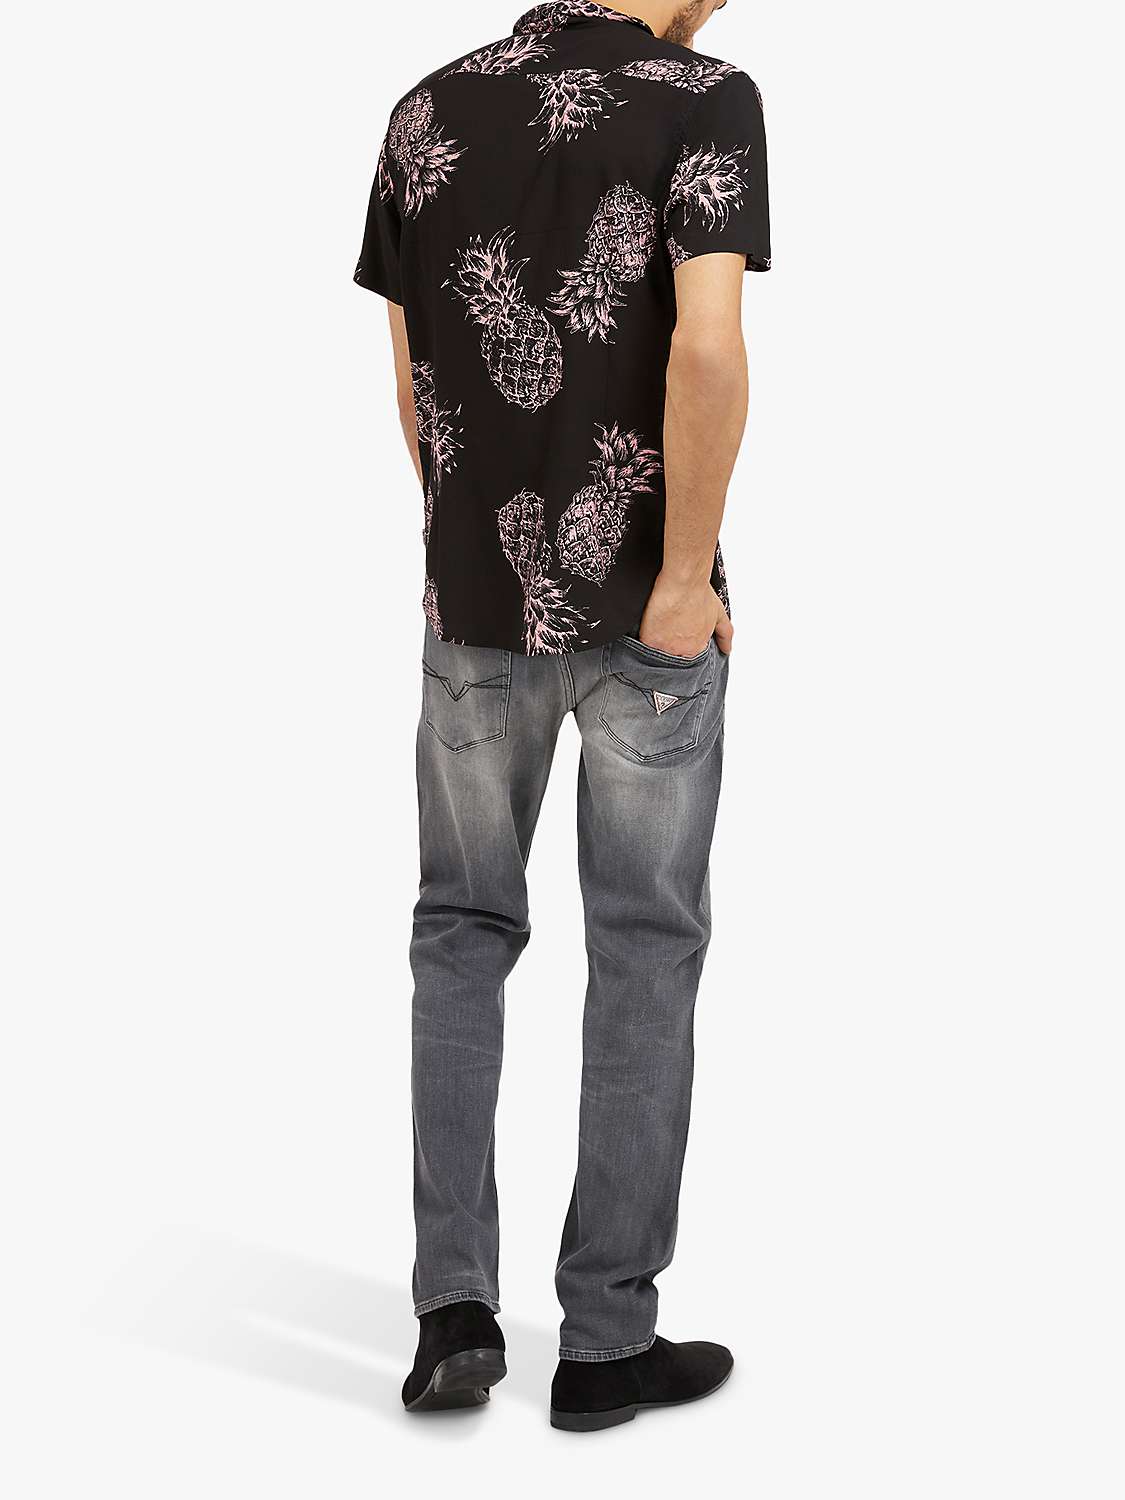 Buy GUESS Angels Slim Fit Jeans Online at johnlewis.com